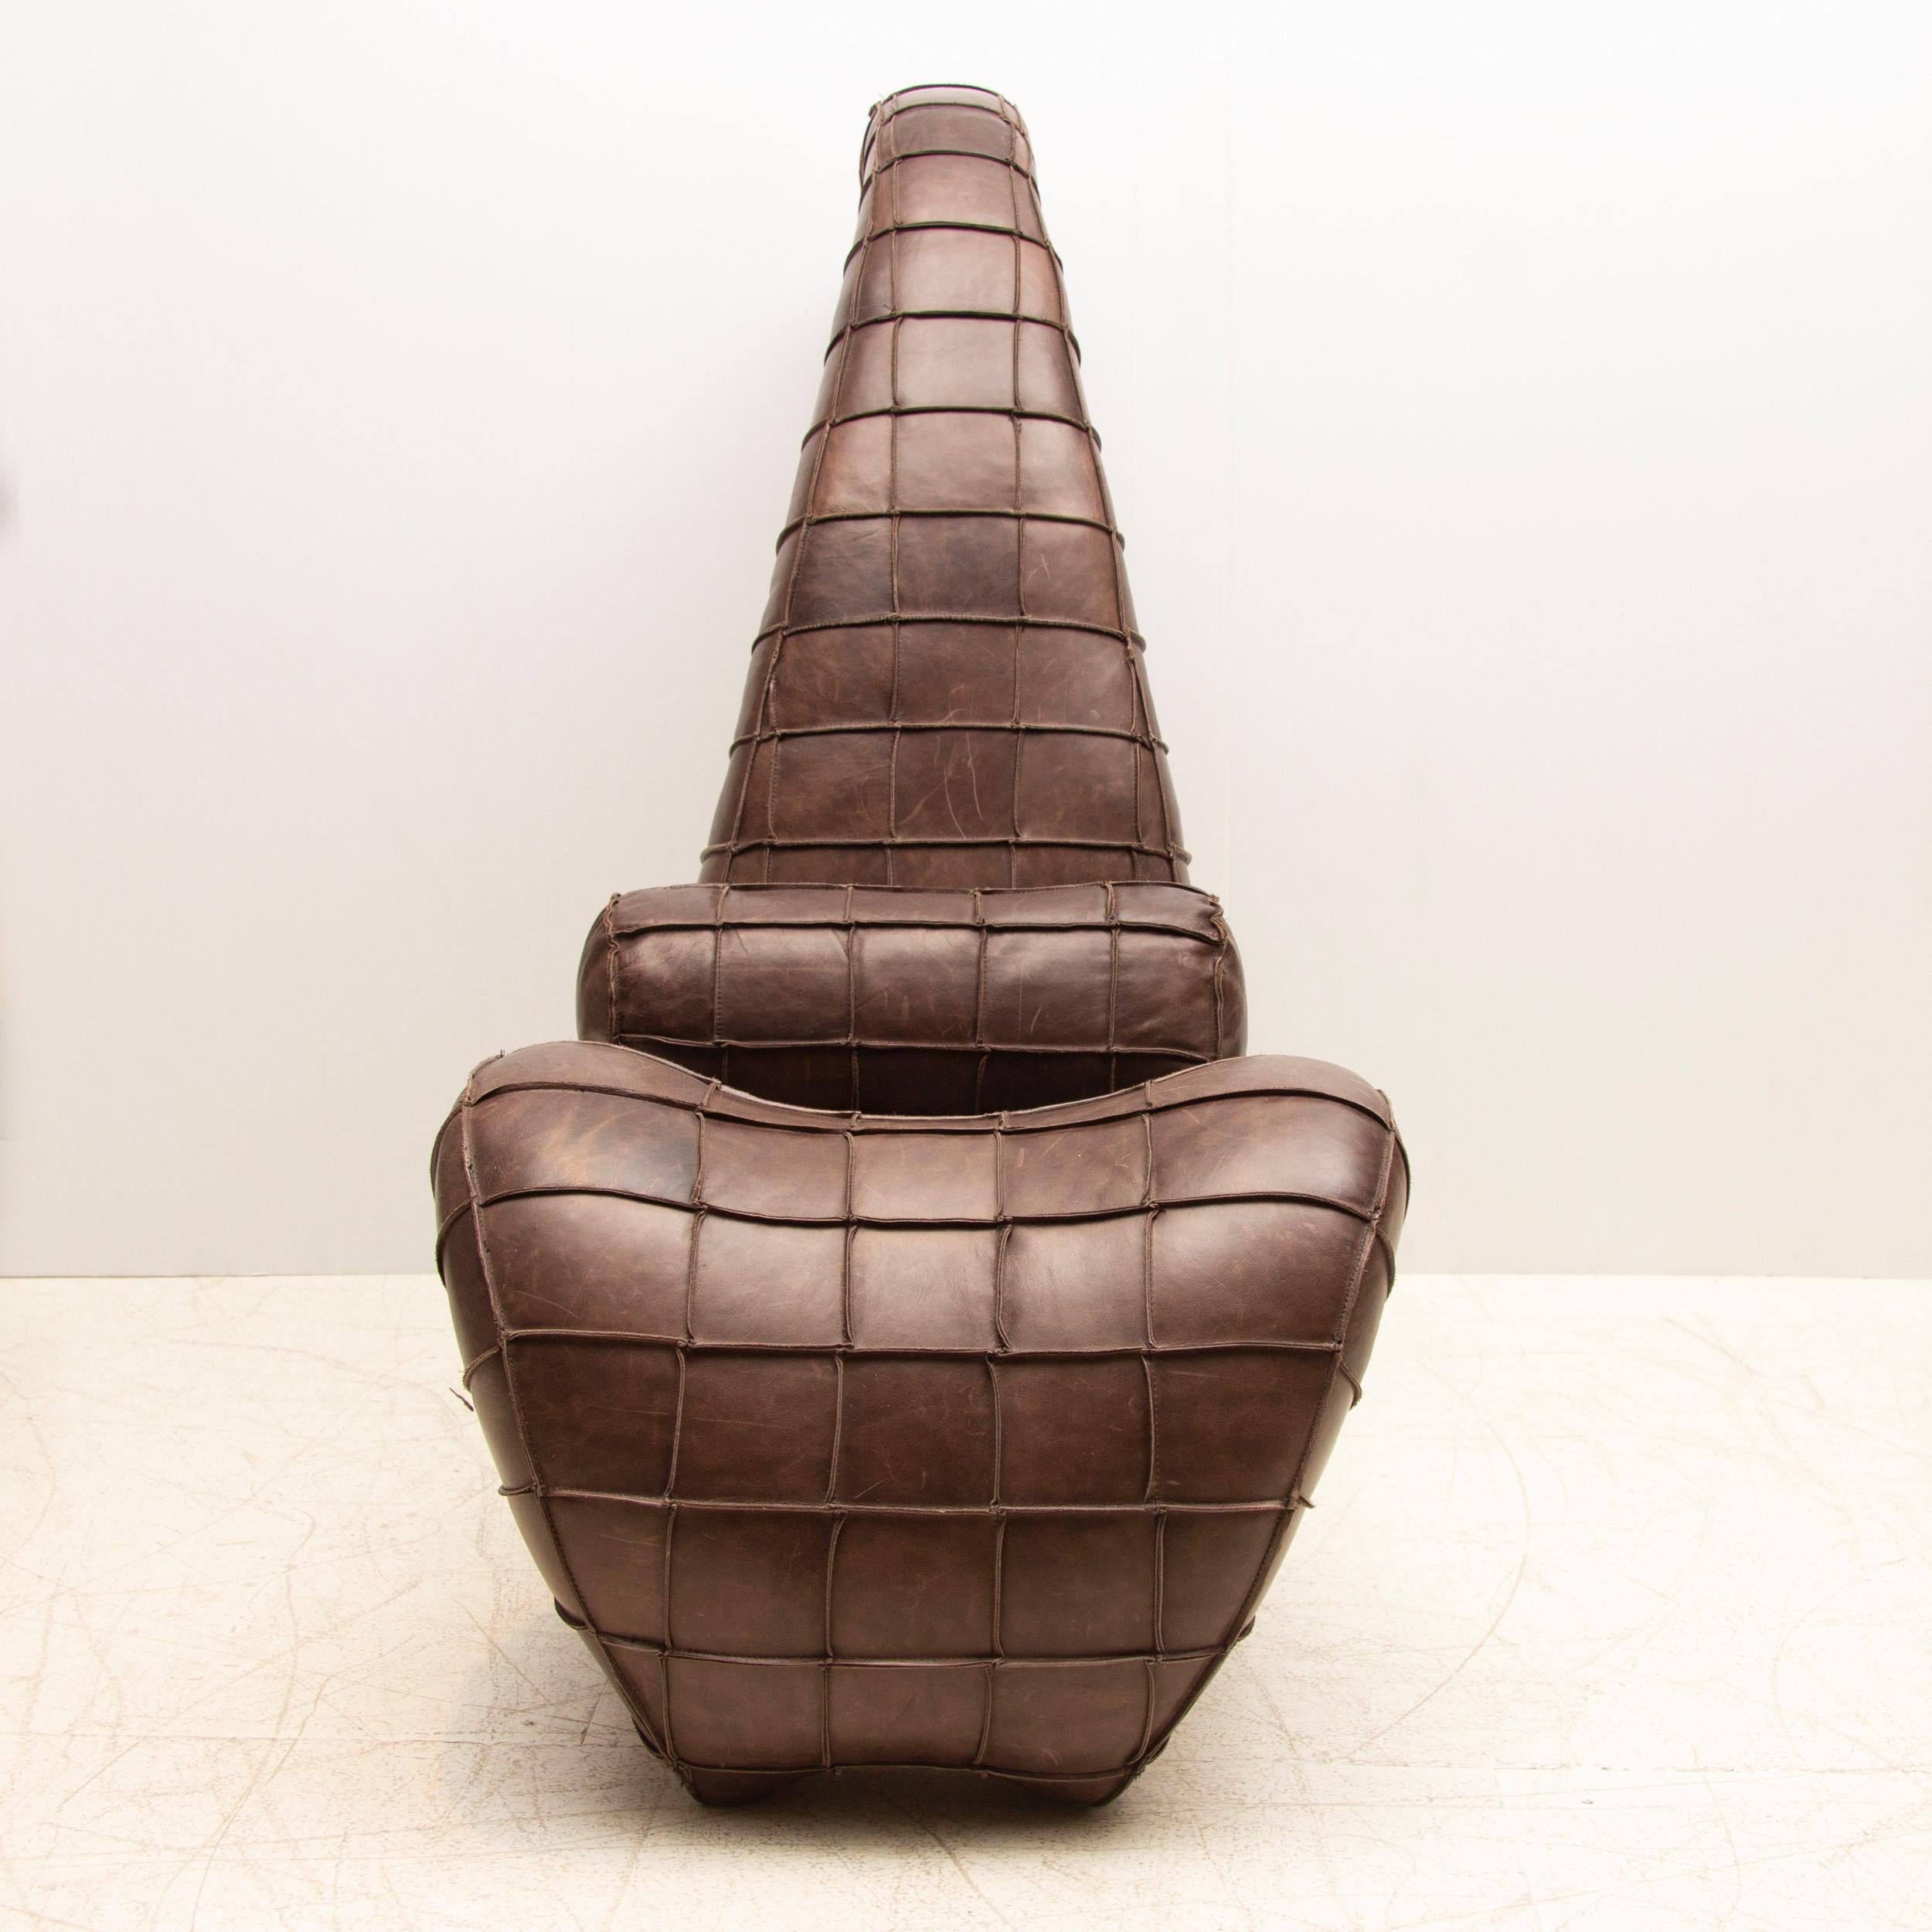 Contemporary midcentury style patchwork leather scorpion chair by Jools Hannon for Chi Design
Measures: Height: 117 cm Width: 63 cm Depth: 138 cm
Ireland, circa 2018.
  